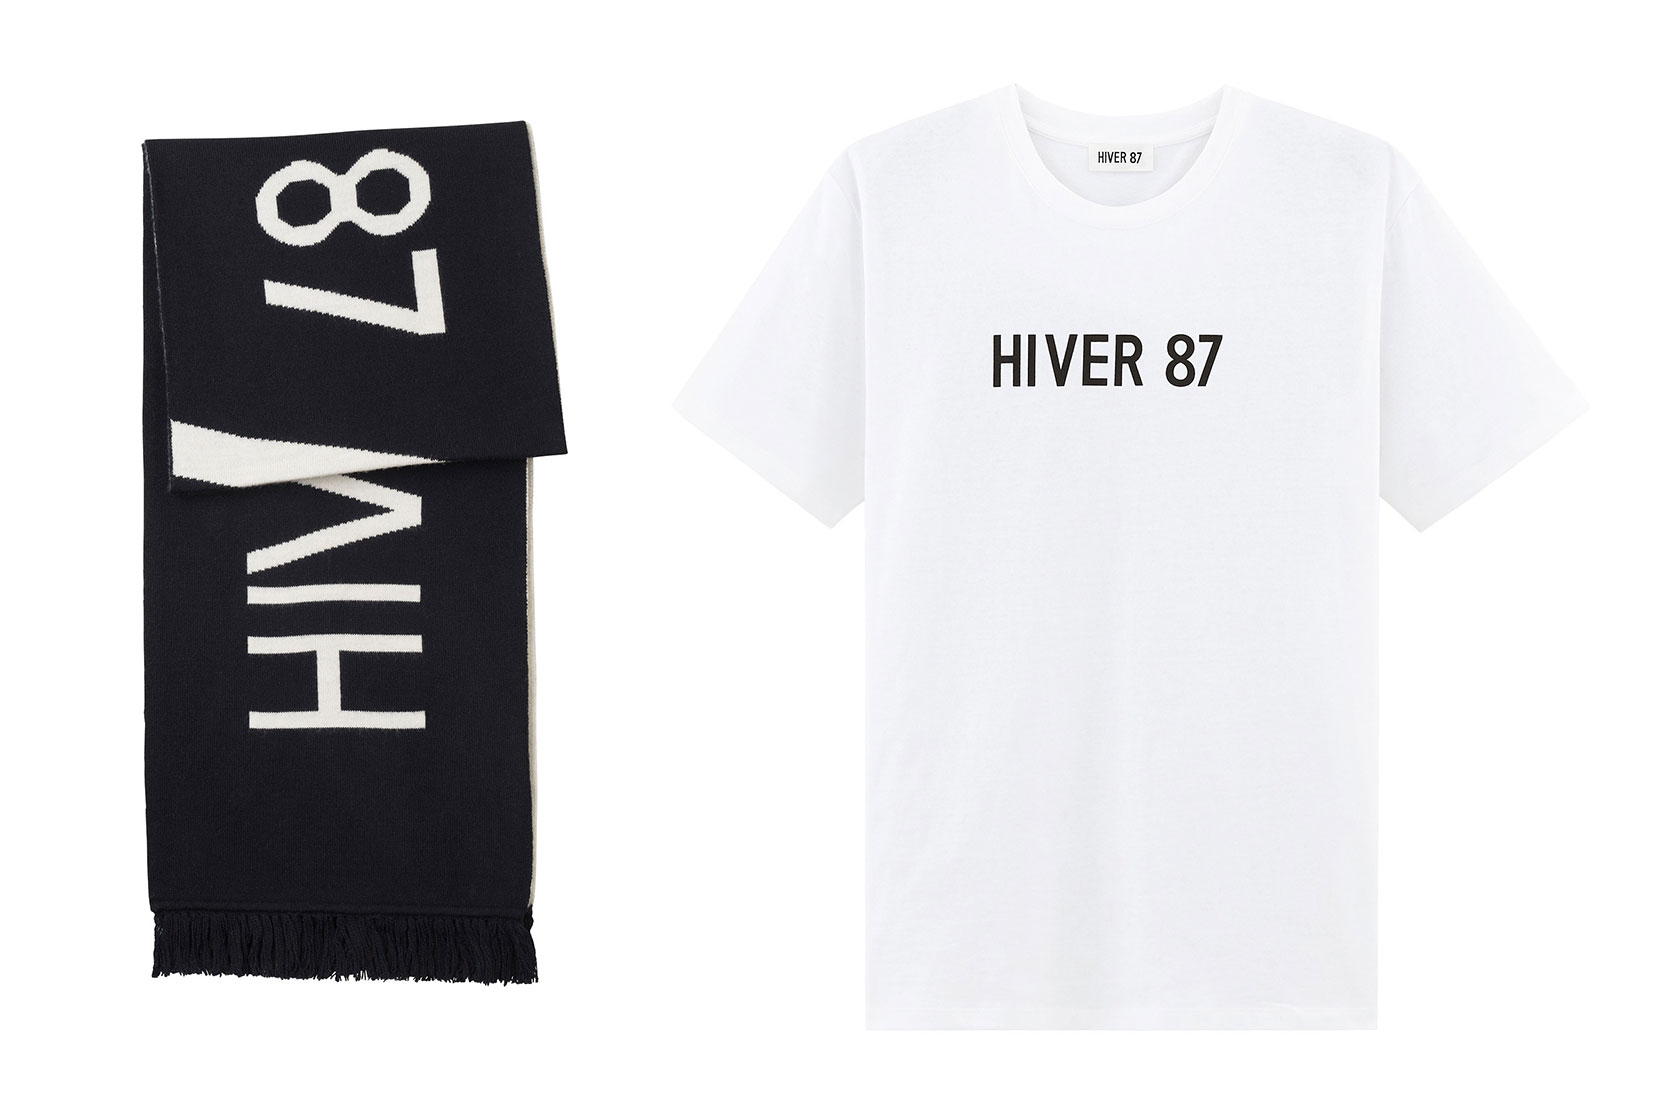 Items from A.P.C.'s new HIVER 87 capsule collection. Images courtesy of apc.fr